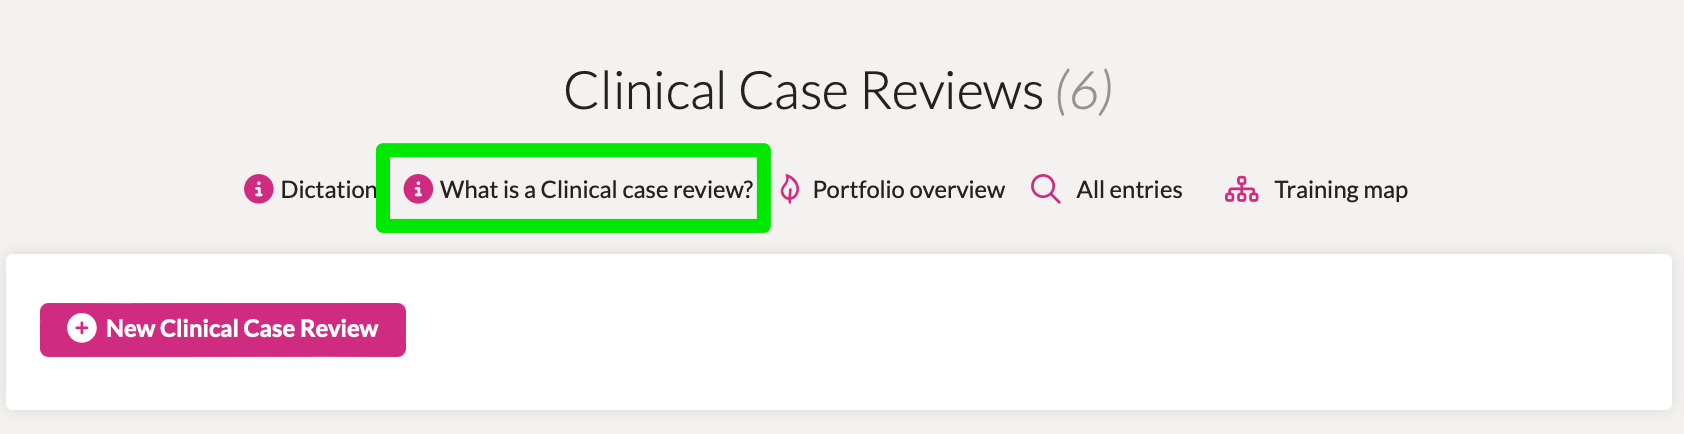 Clinical_Case_Reviews_-_FourteenFish.png